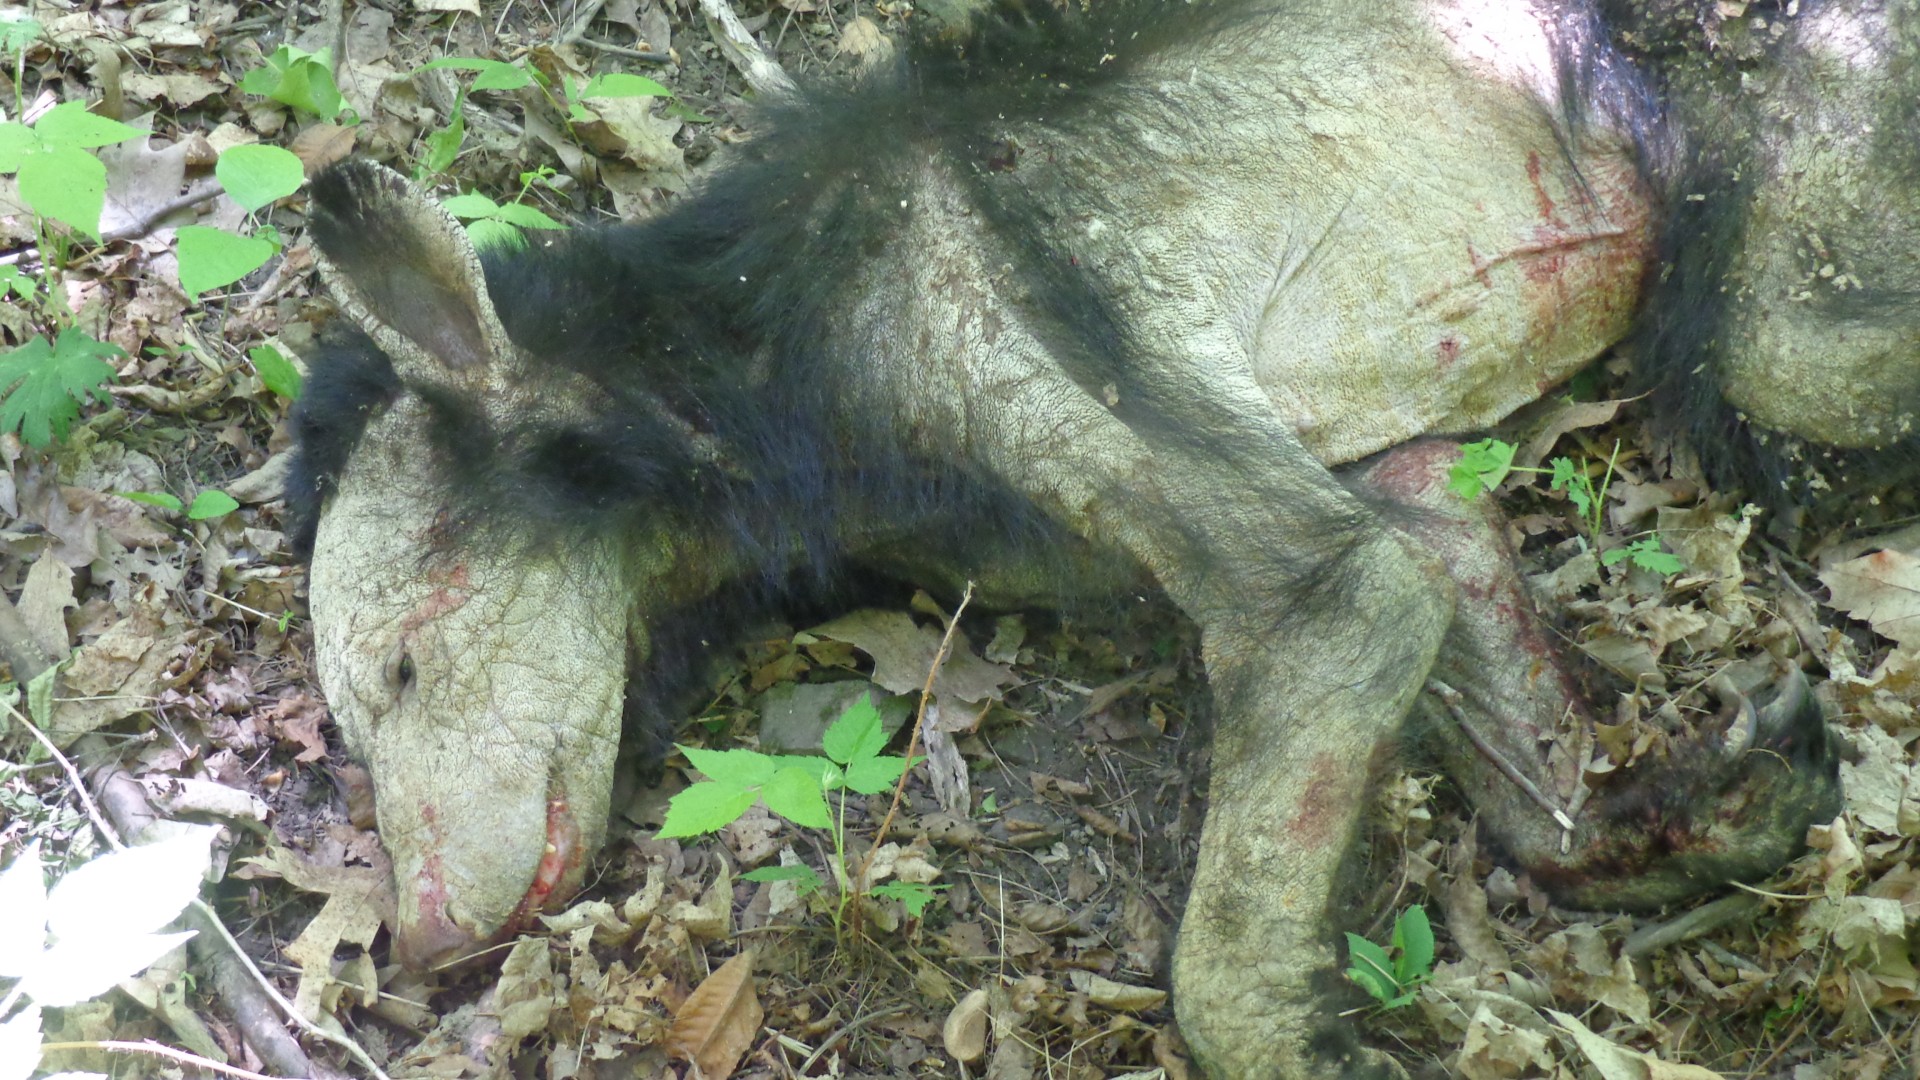 deceased black bear with advanced mange infection